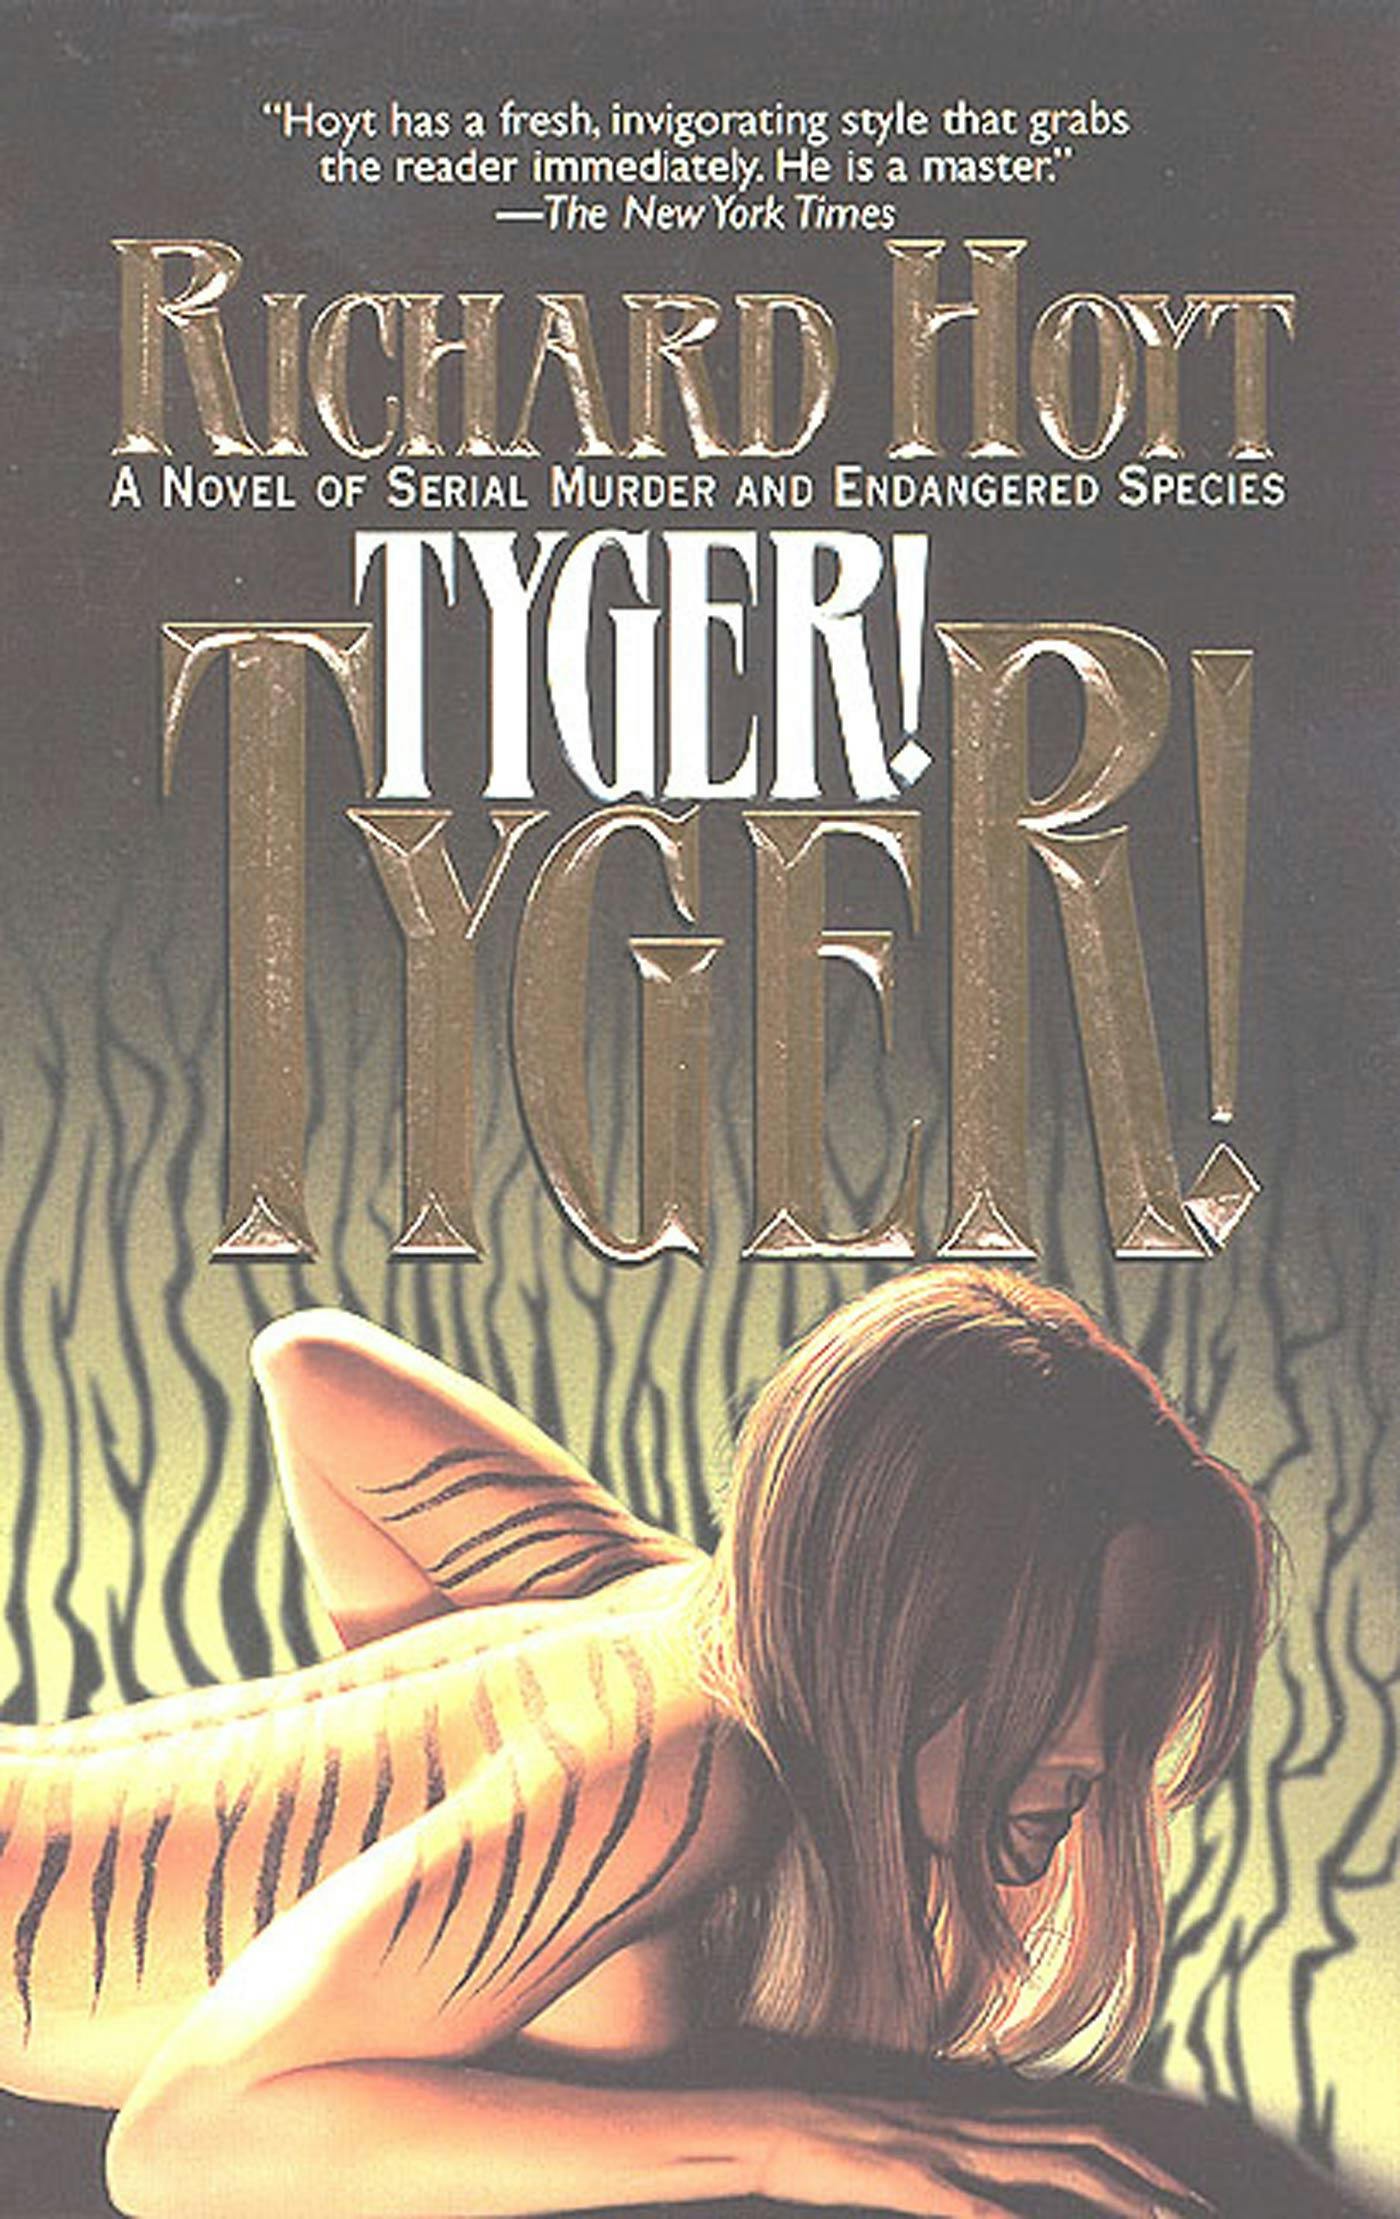 Cover for the book titled as: Tyger! Tyger!